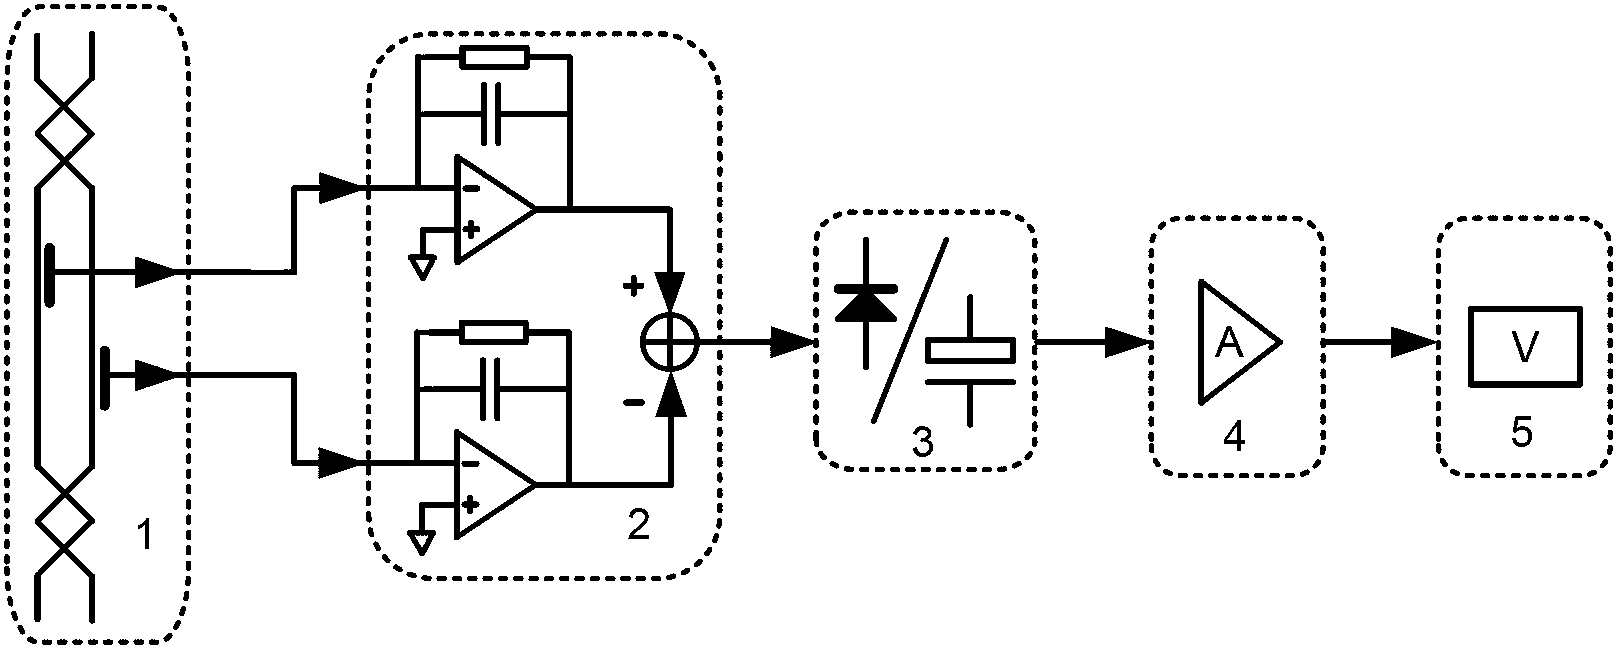 Non-contacting-type power frequency voltage measuring device